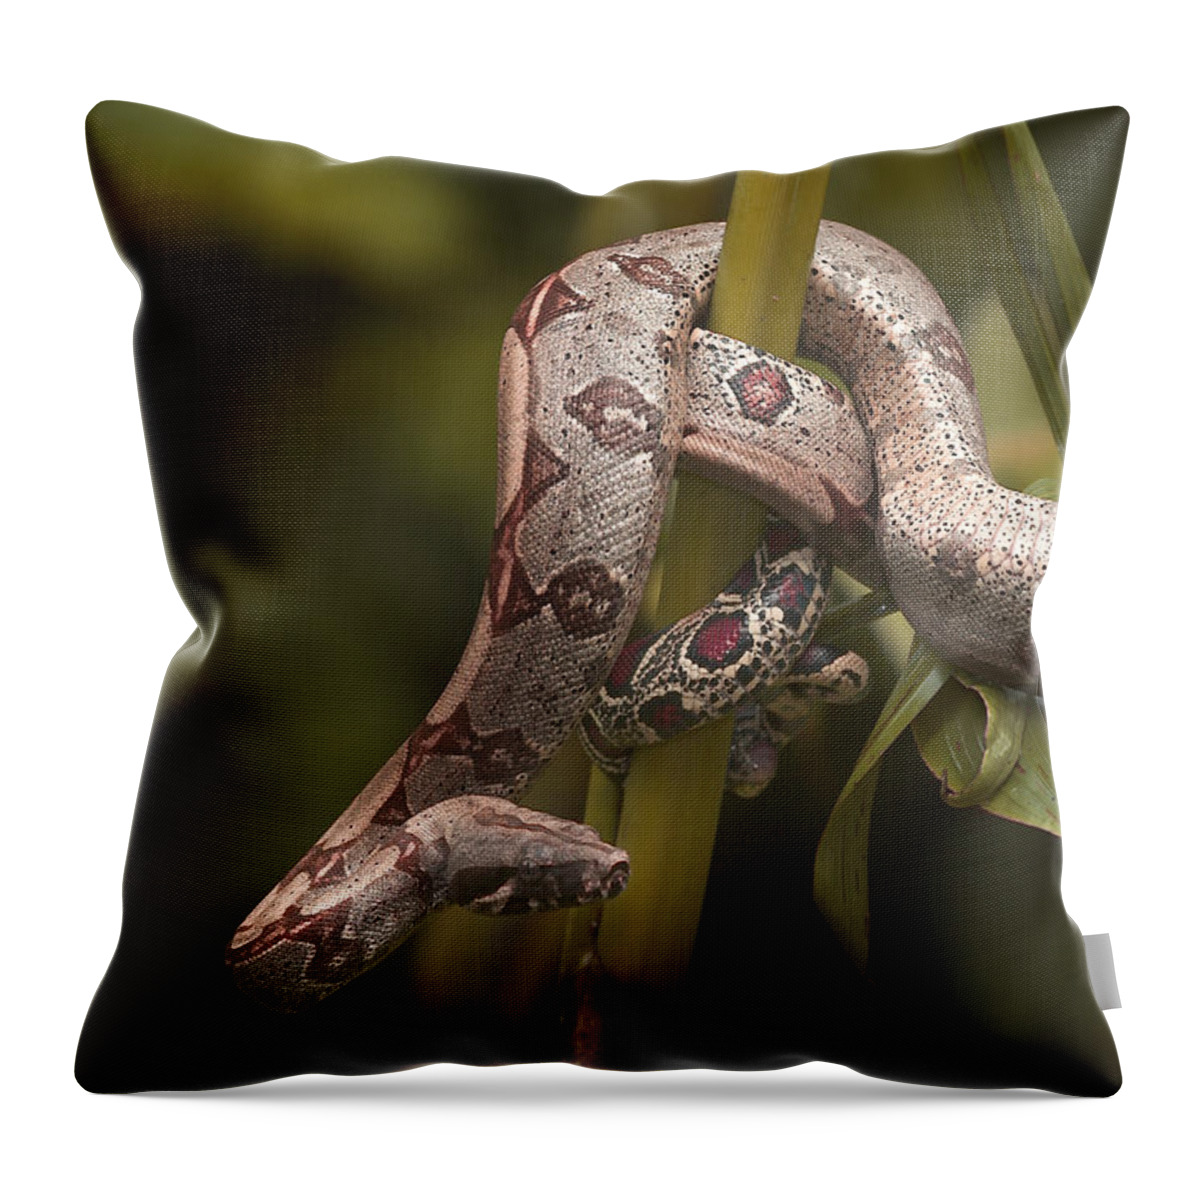 Amazonian Throw Pillow featuring the photograph Red-tailed Boa by Michael Lustbader